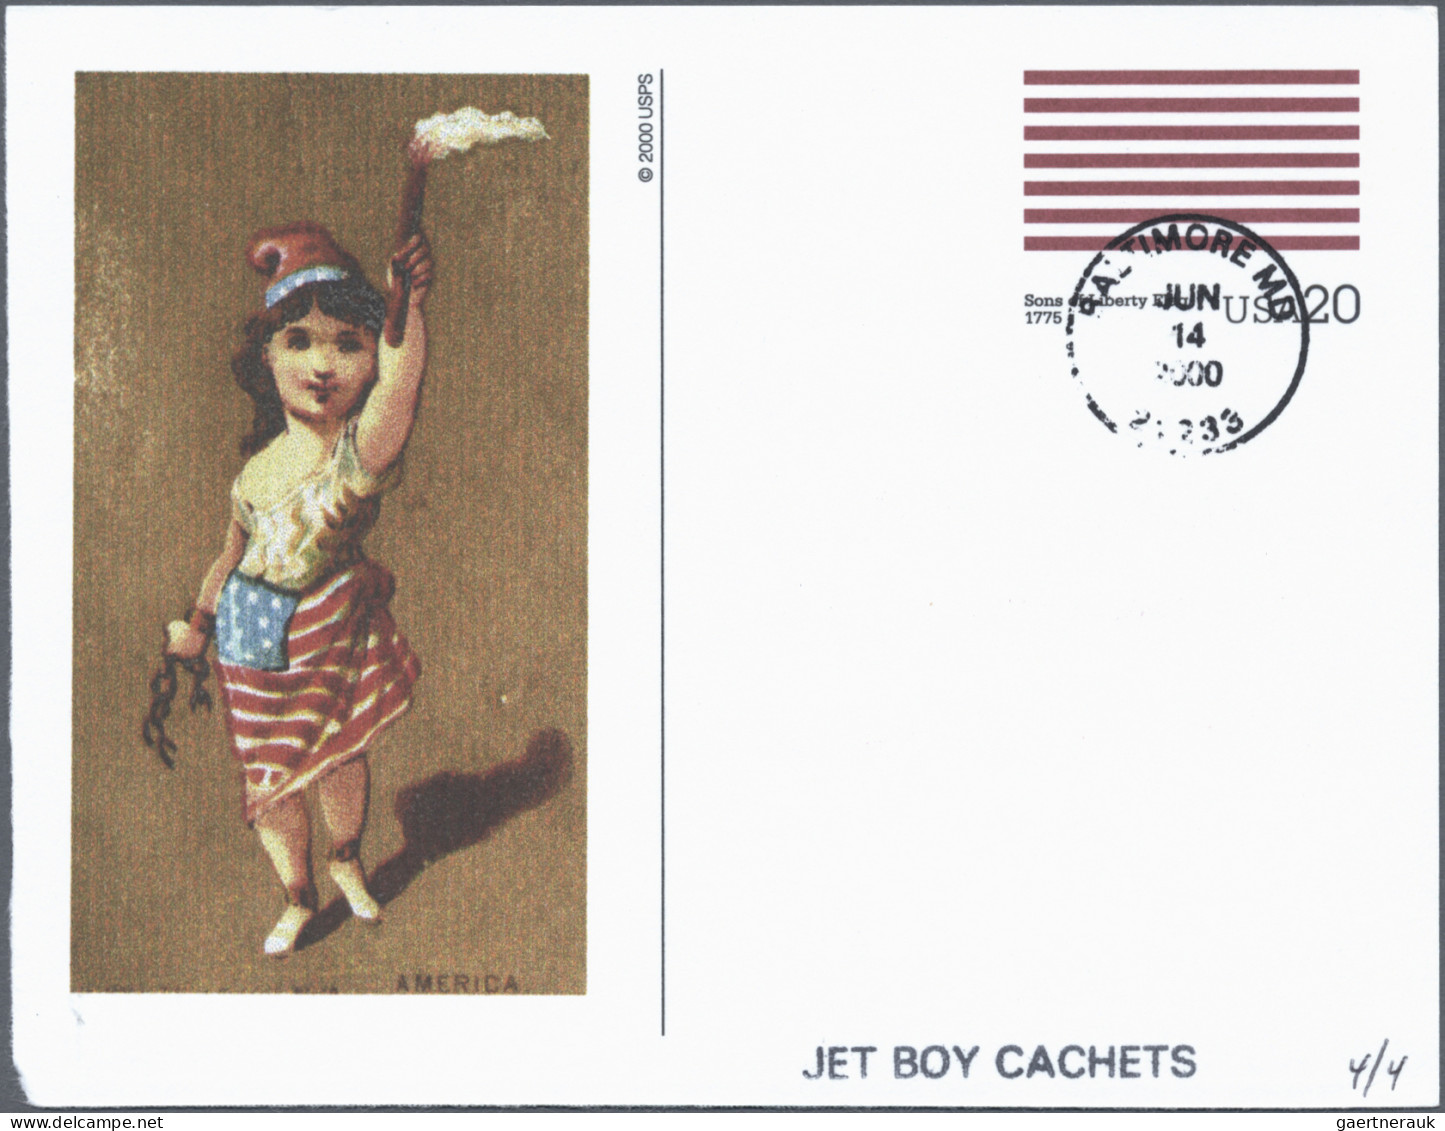 United States - Postal Stationary: 2000, Postal Cards with IMPRINT (CACHET), "St